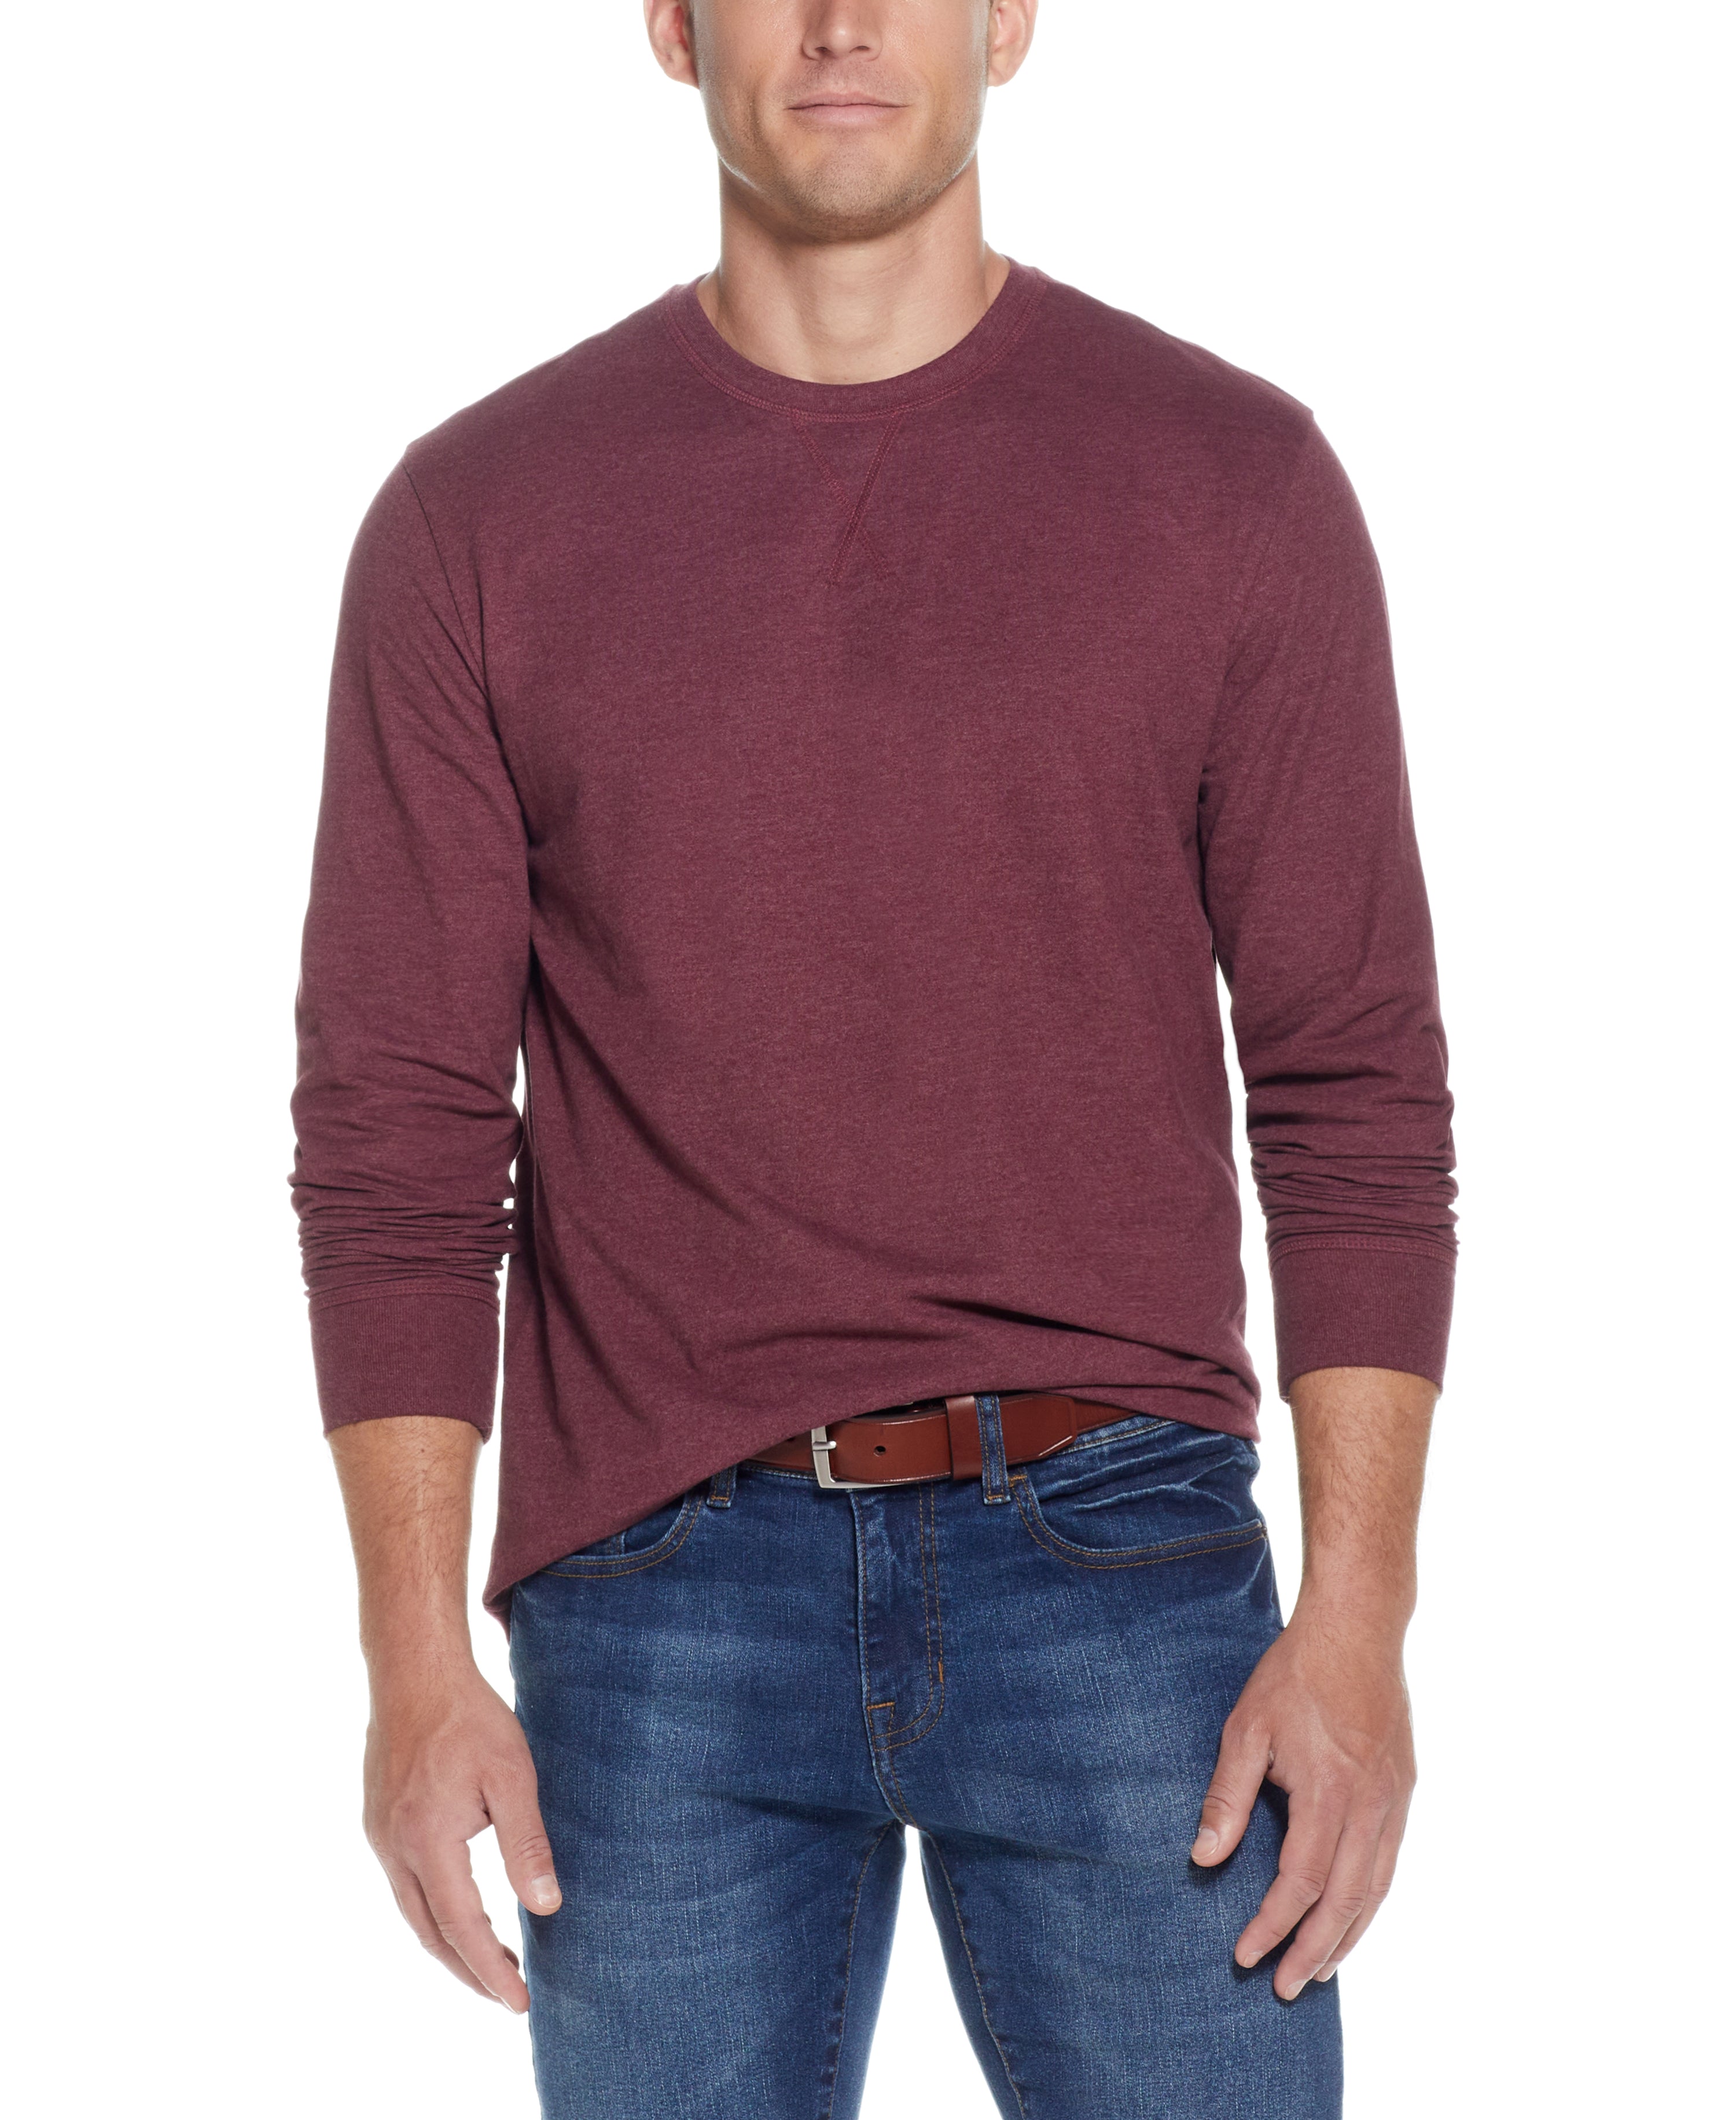 LONG SLEEVE BRUSHED JERSEY CREW in CABERNET HTHR